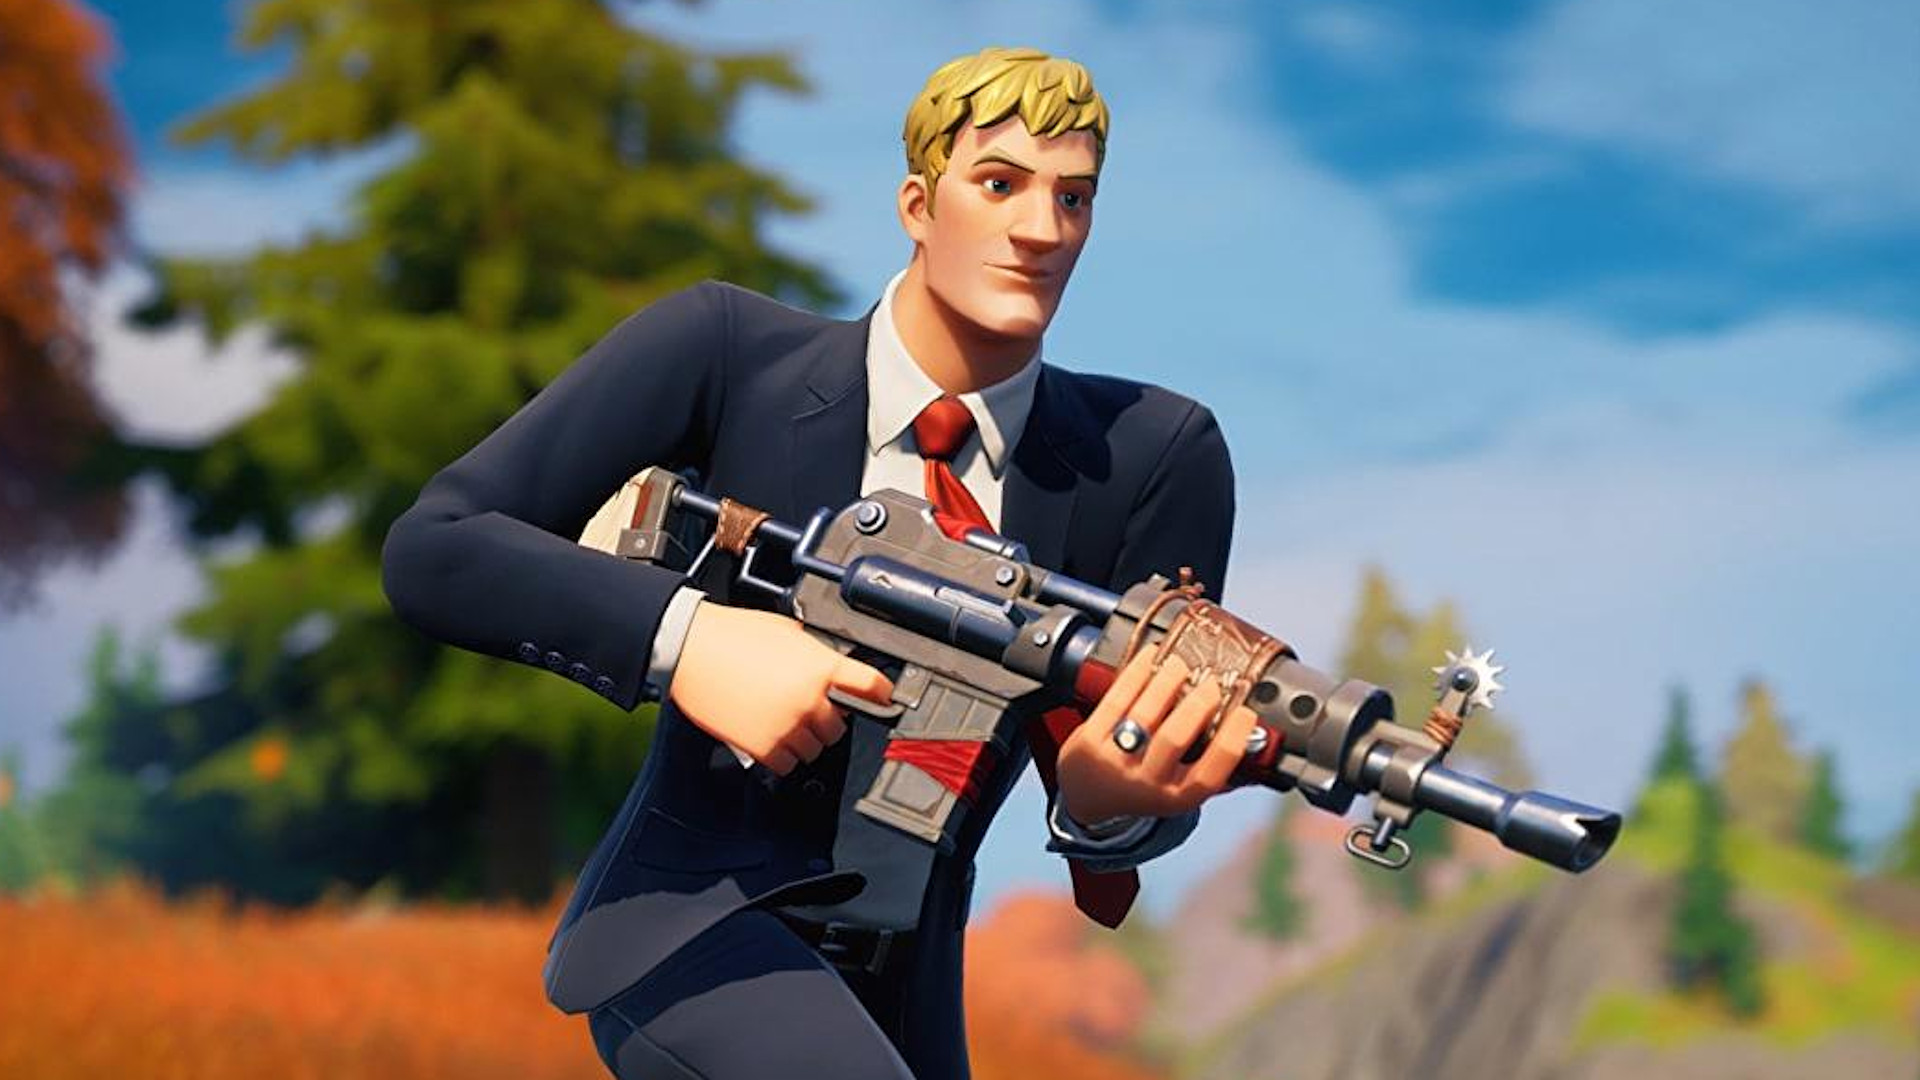 Fortnite is free on iPhone and Android again with Xbox Cloud